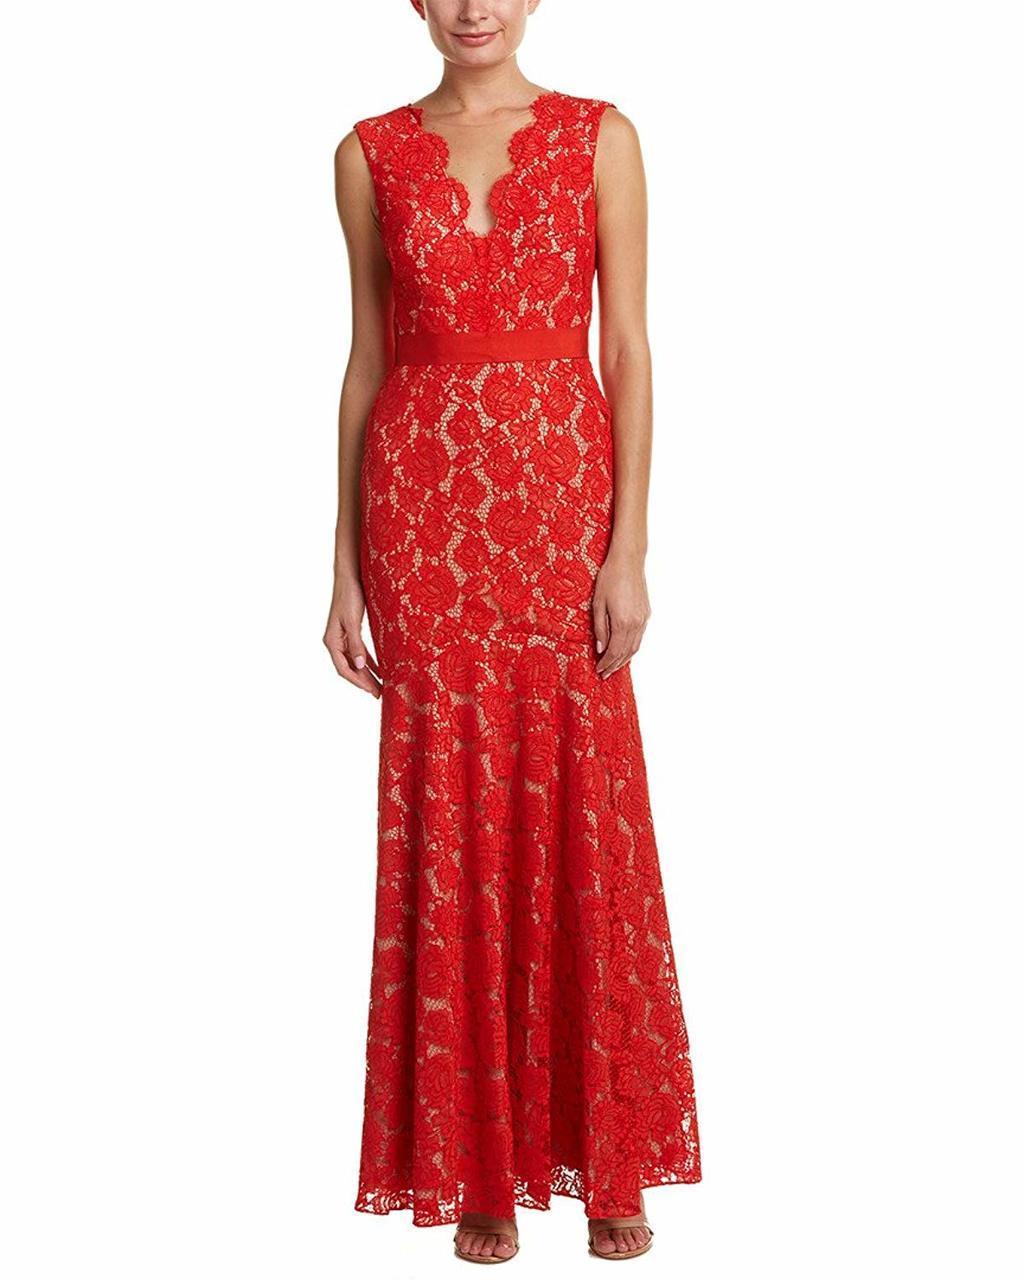 Theia - 883183 Floral Lace Scalloped V-neck Trumpet Dress
